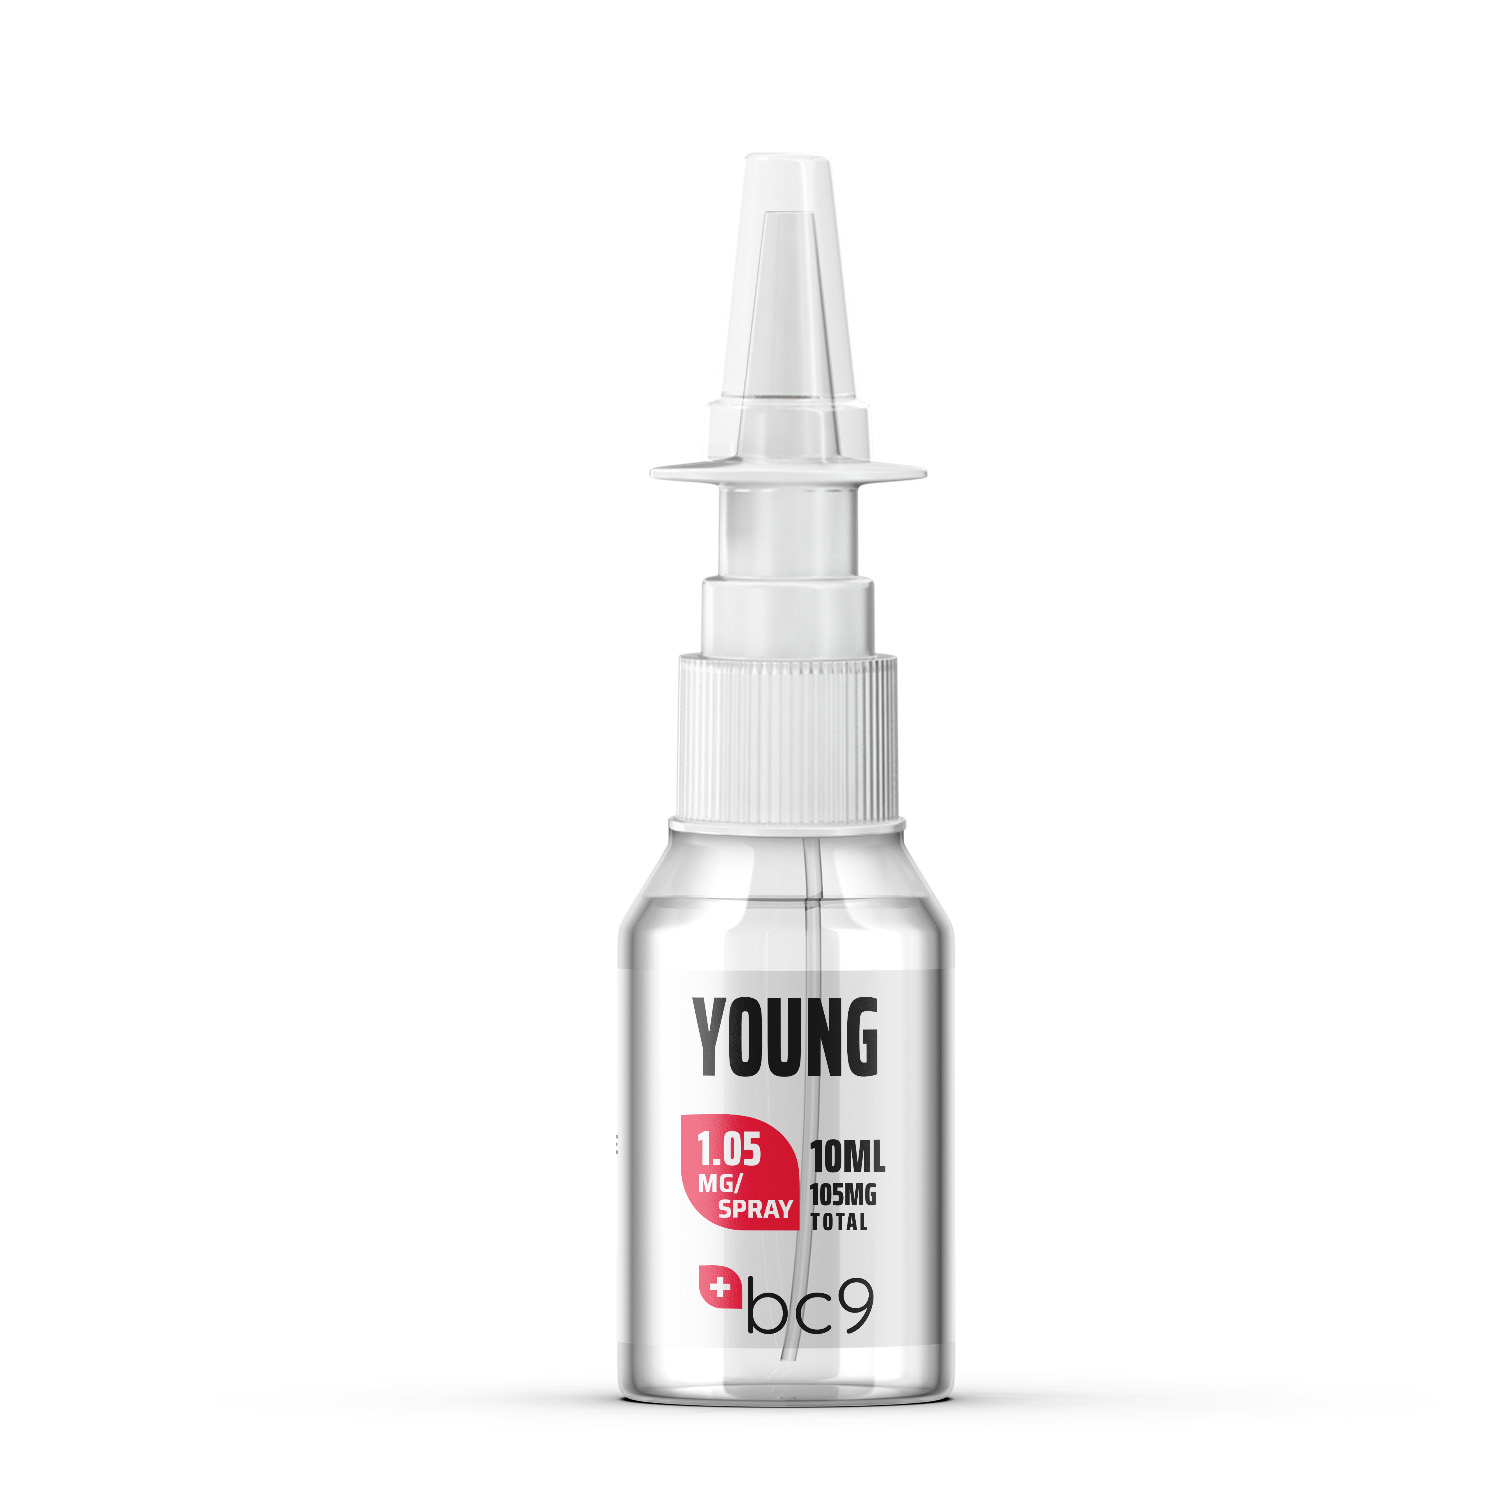 Young Spray (Epithalon + DSIP) For Sale | BC9.org